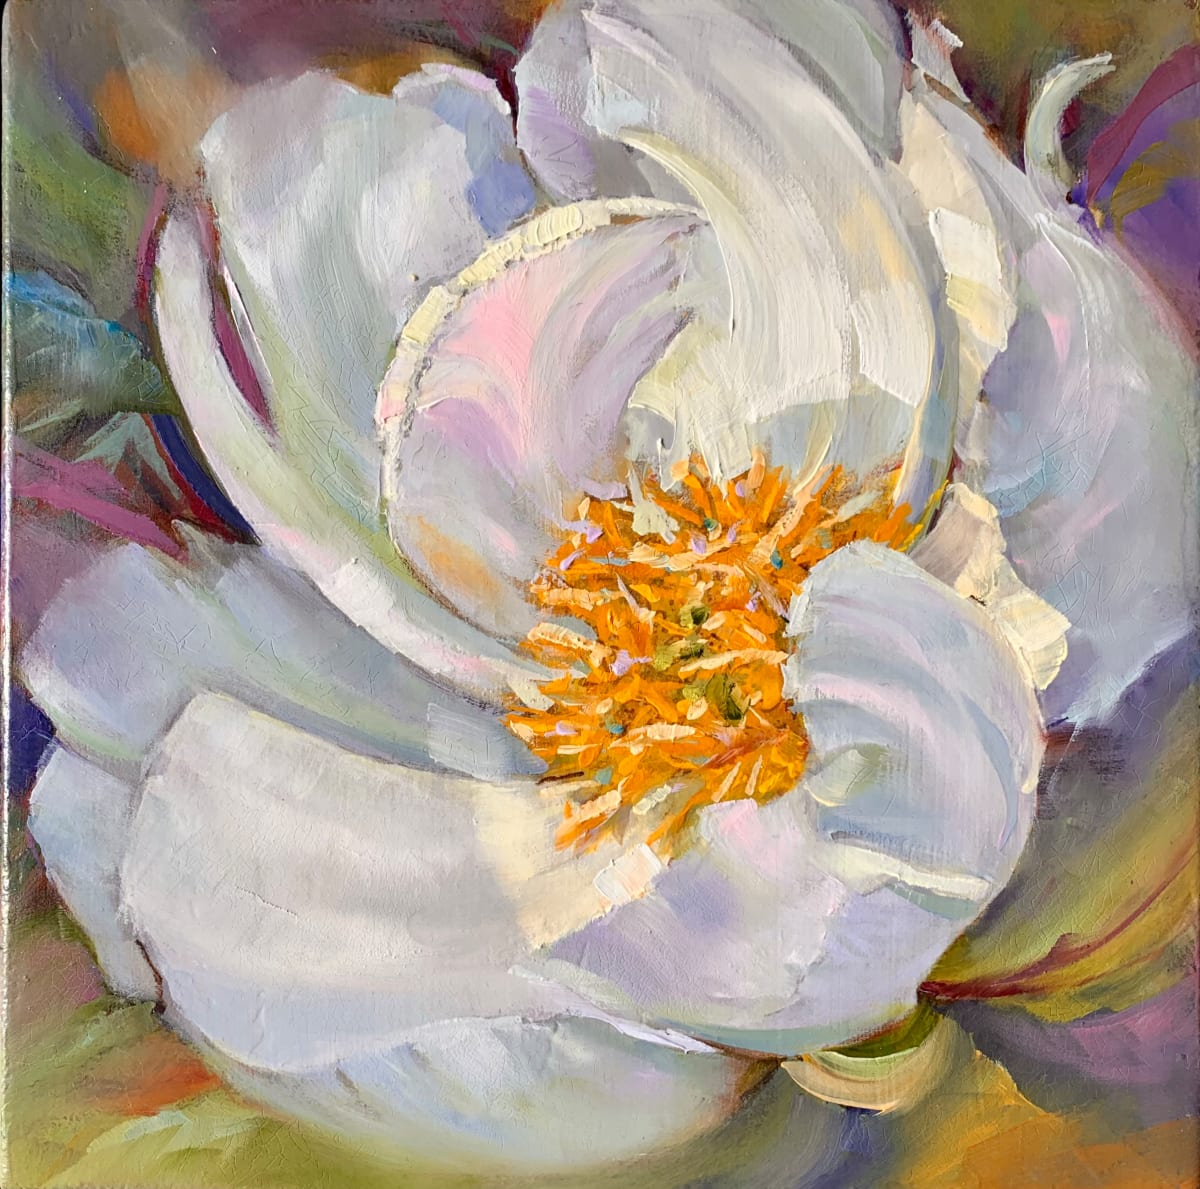 Peony White Delight by Pat Cross  Image: New painting